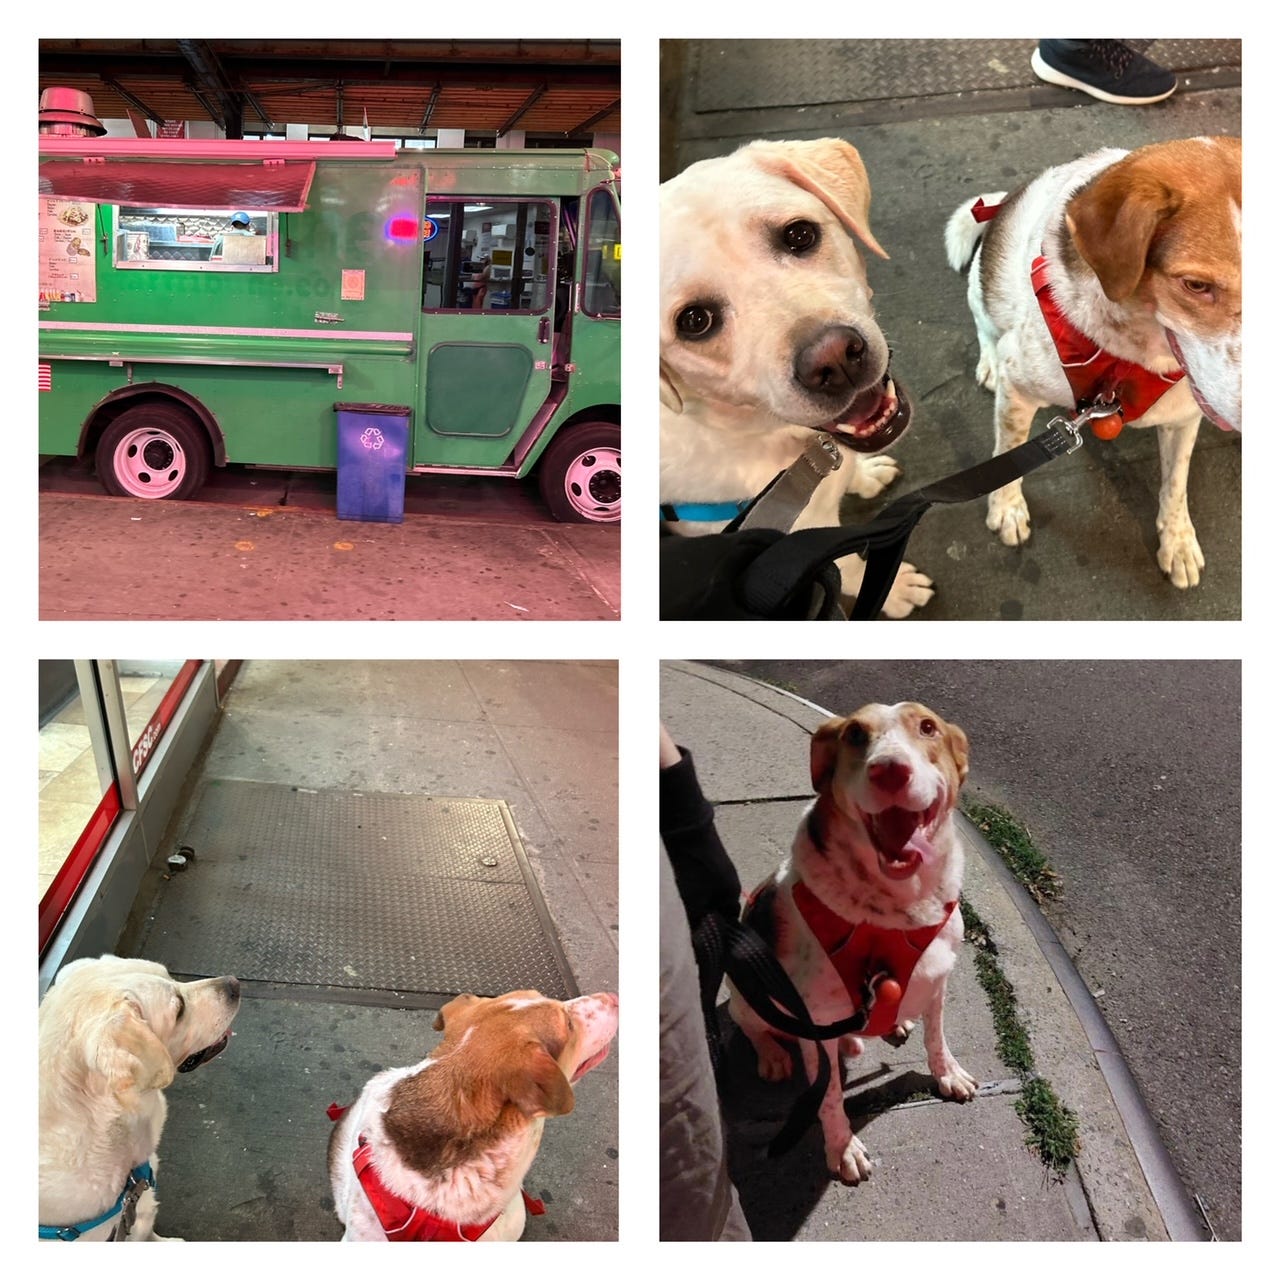 Image shows four images: a green taco truck, an excited yellow lab alongside a pensive hound, a yellow lab and hound looking eagerly into the distance, and an elated hound.